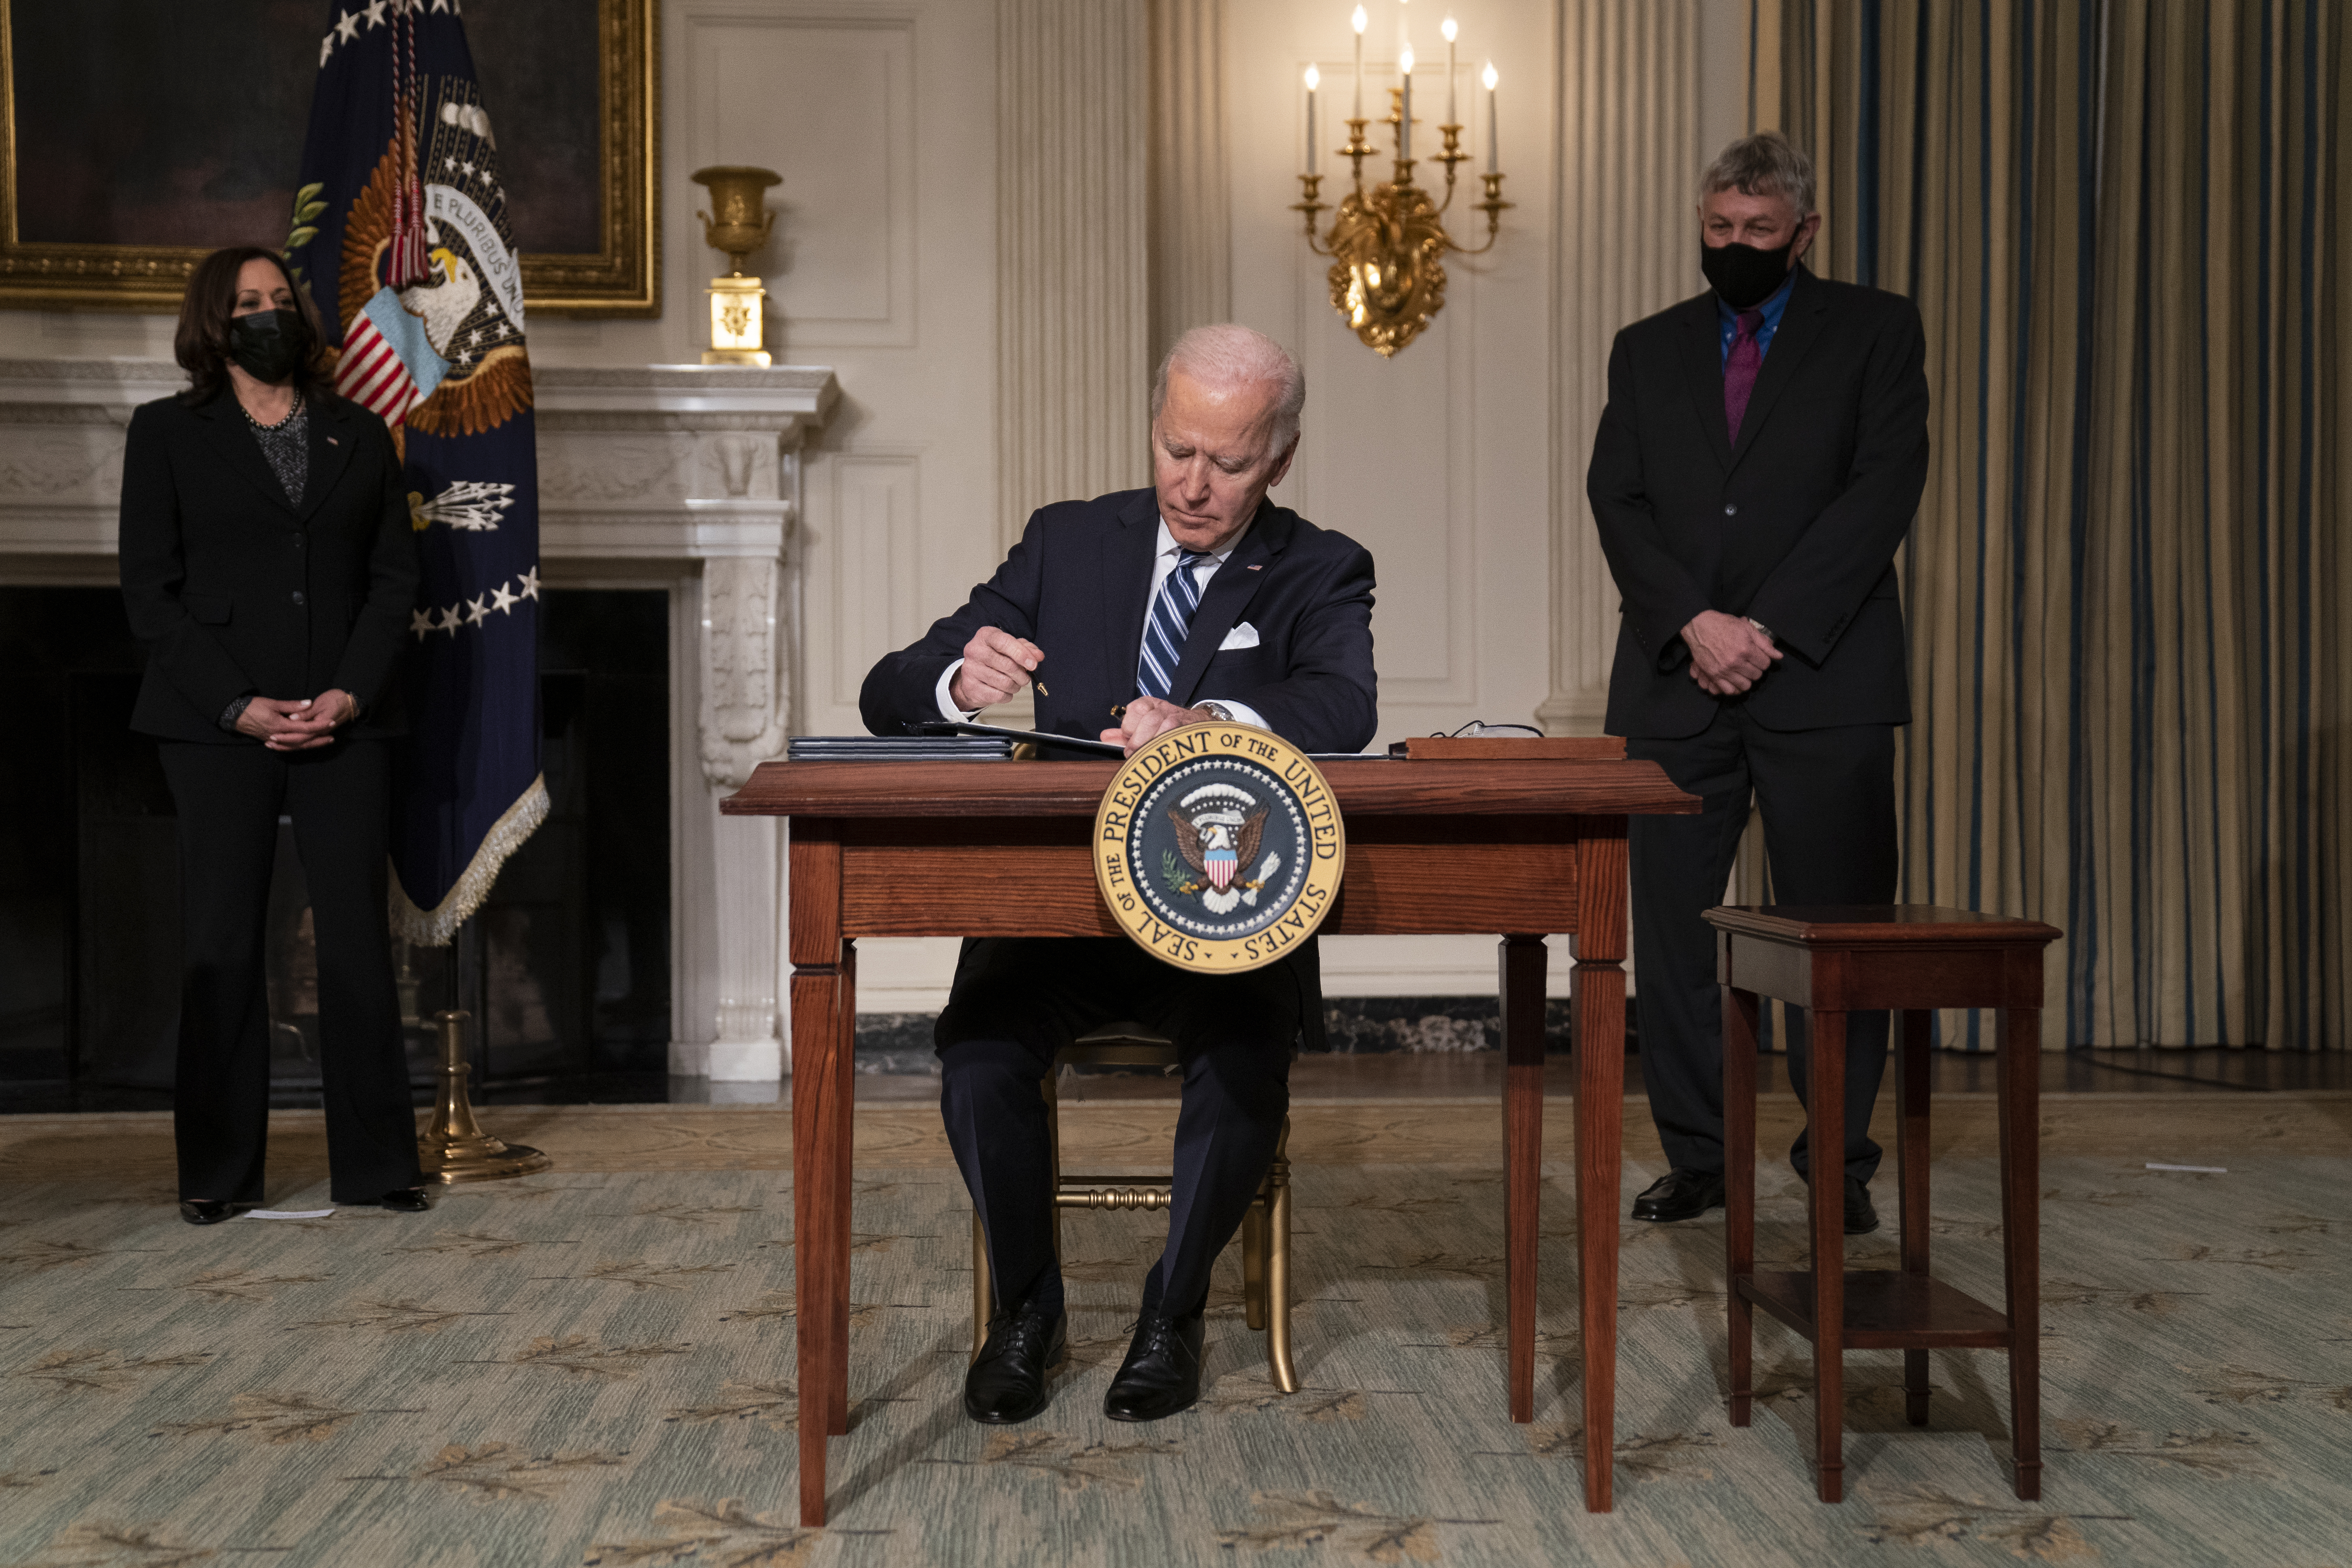 Vice President Kamala Harris, left, and White House science adviser Dr. Eric Lander, right, look on as President Joe Biden signs a series of executive orders on climate change, in the State Dining Room of the White House, Wednesday, Jan. 27, 2021, in Washington. (AP Photo/Evan Vucci)